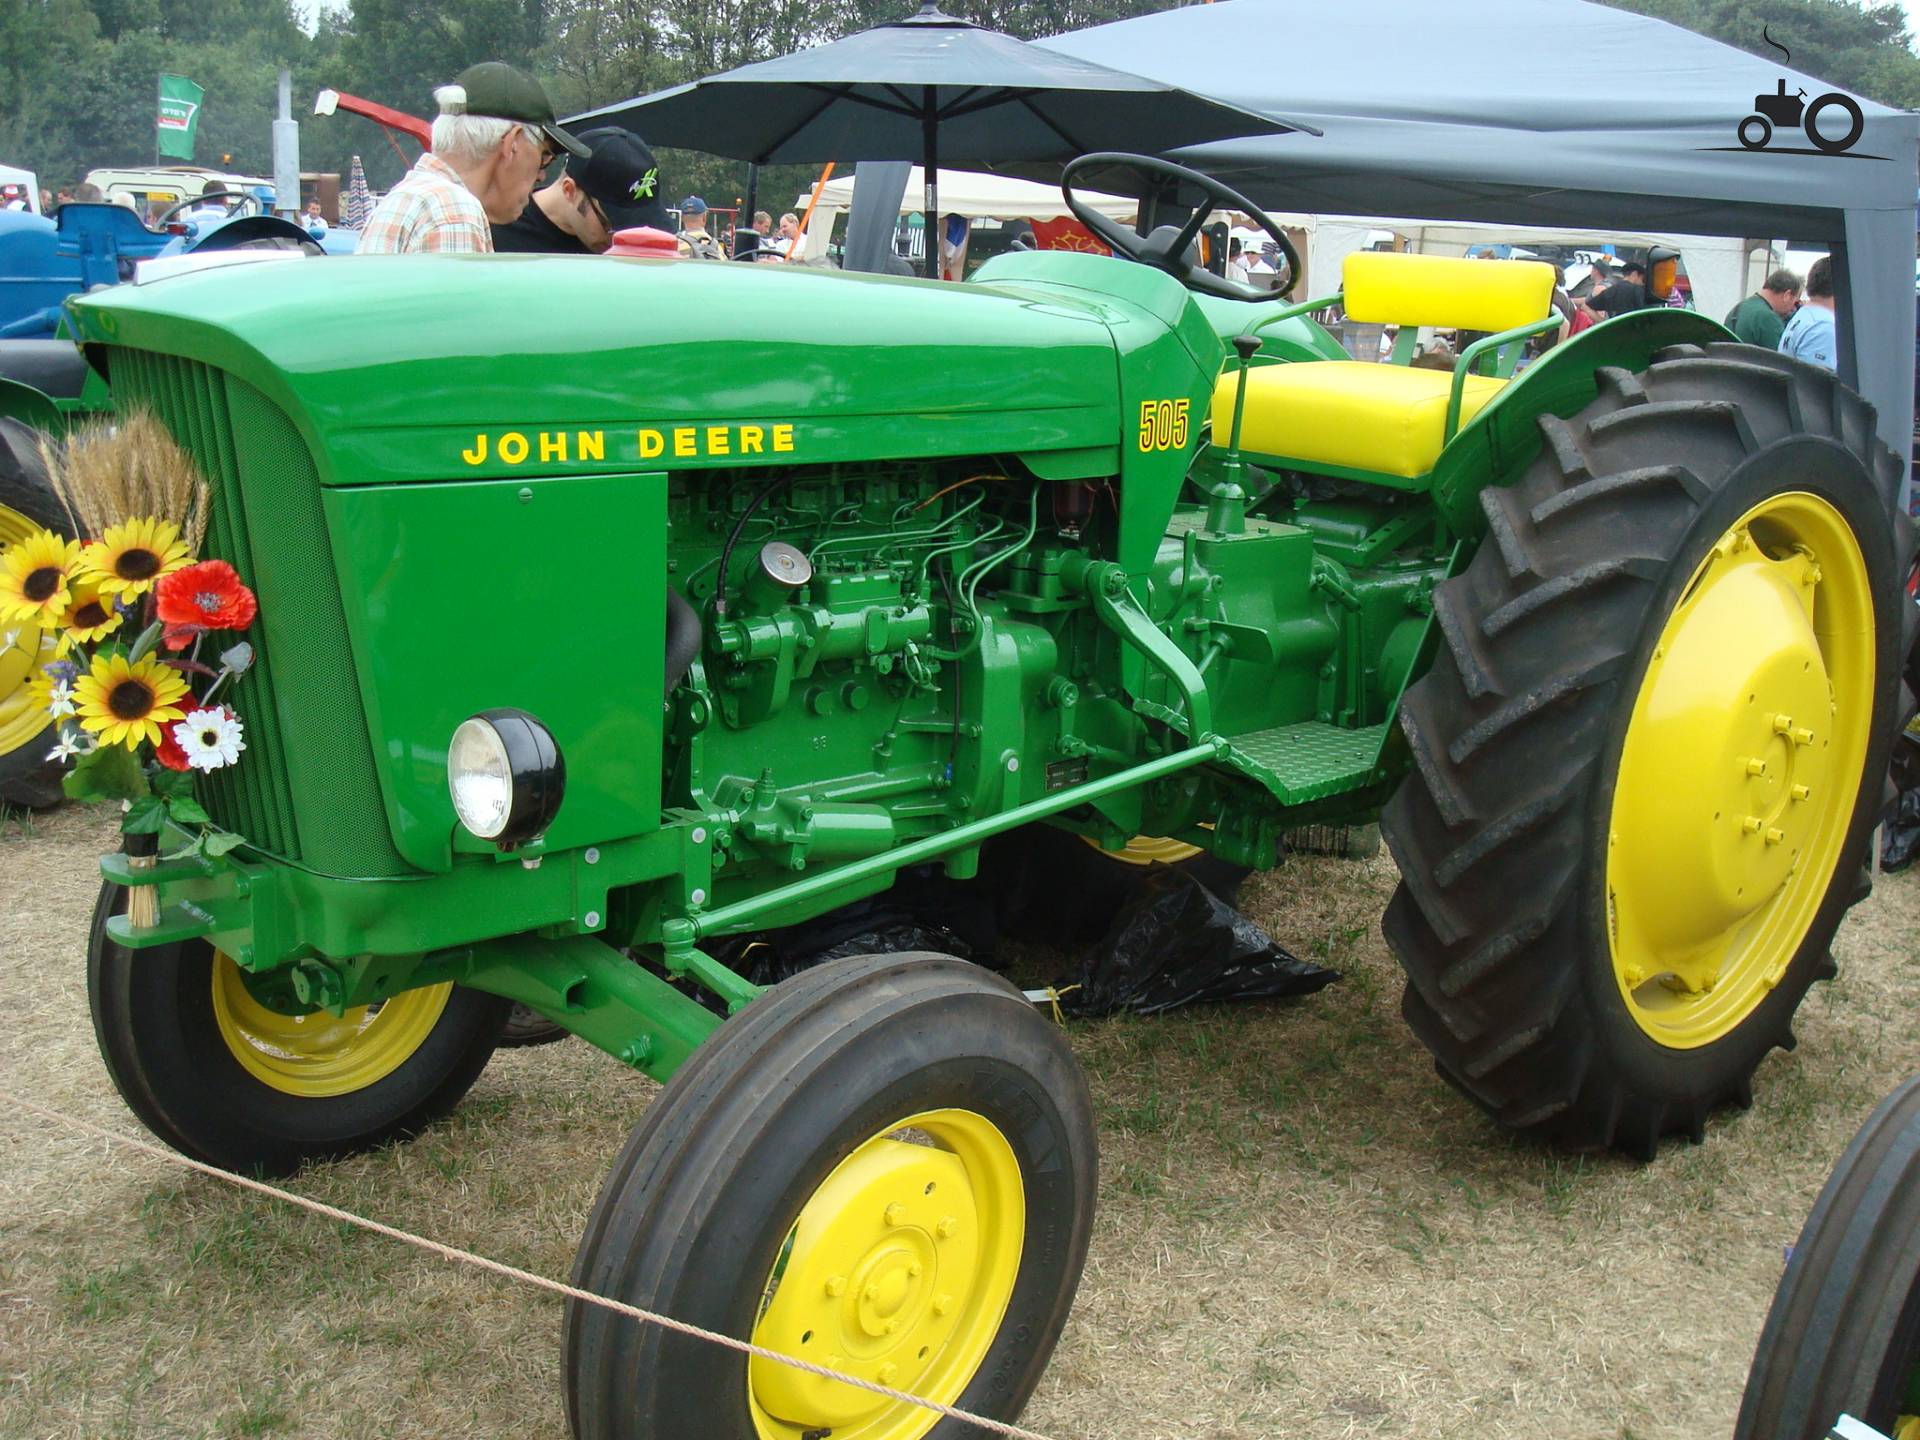 John Deere 505 Specs and data - Everything about the John Deere 505